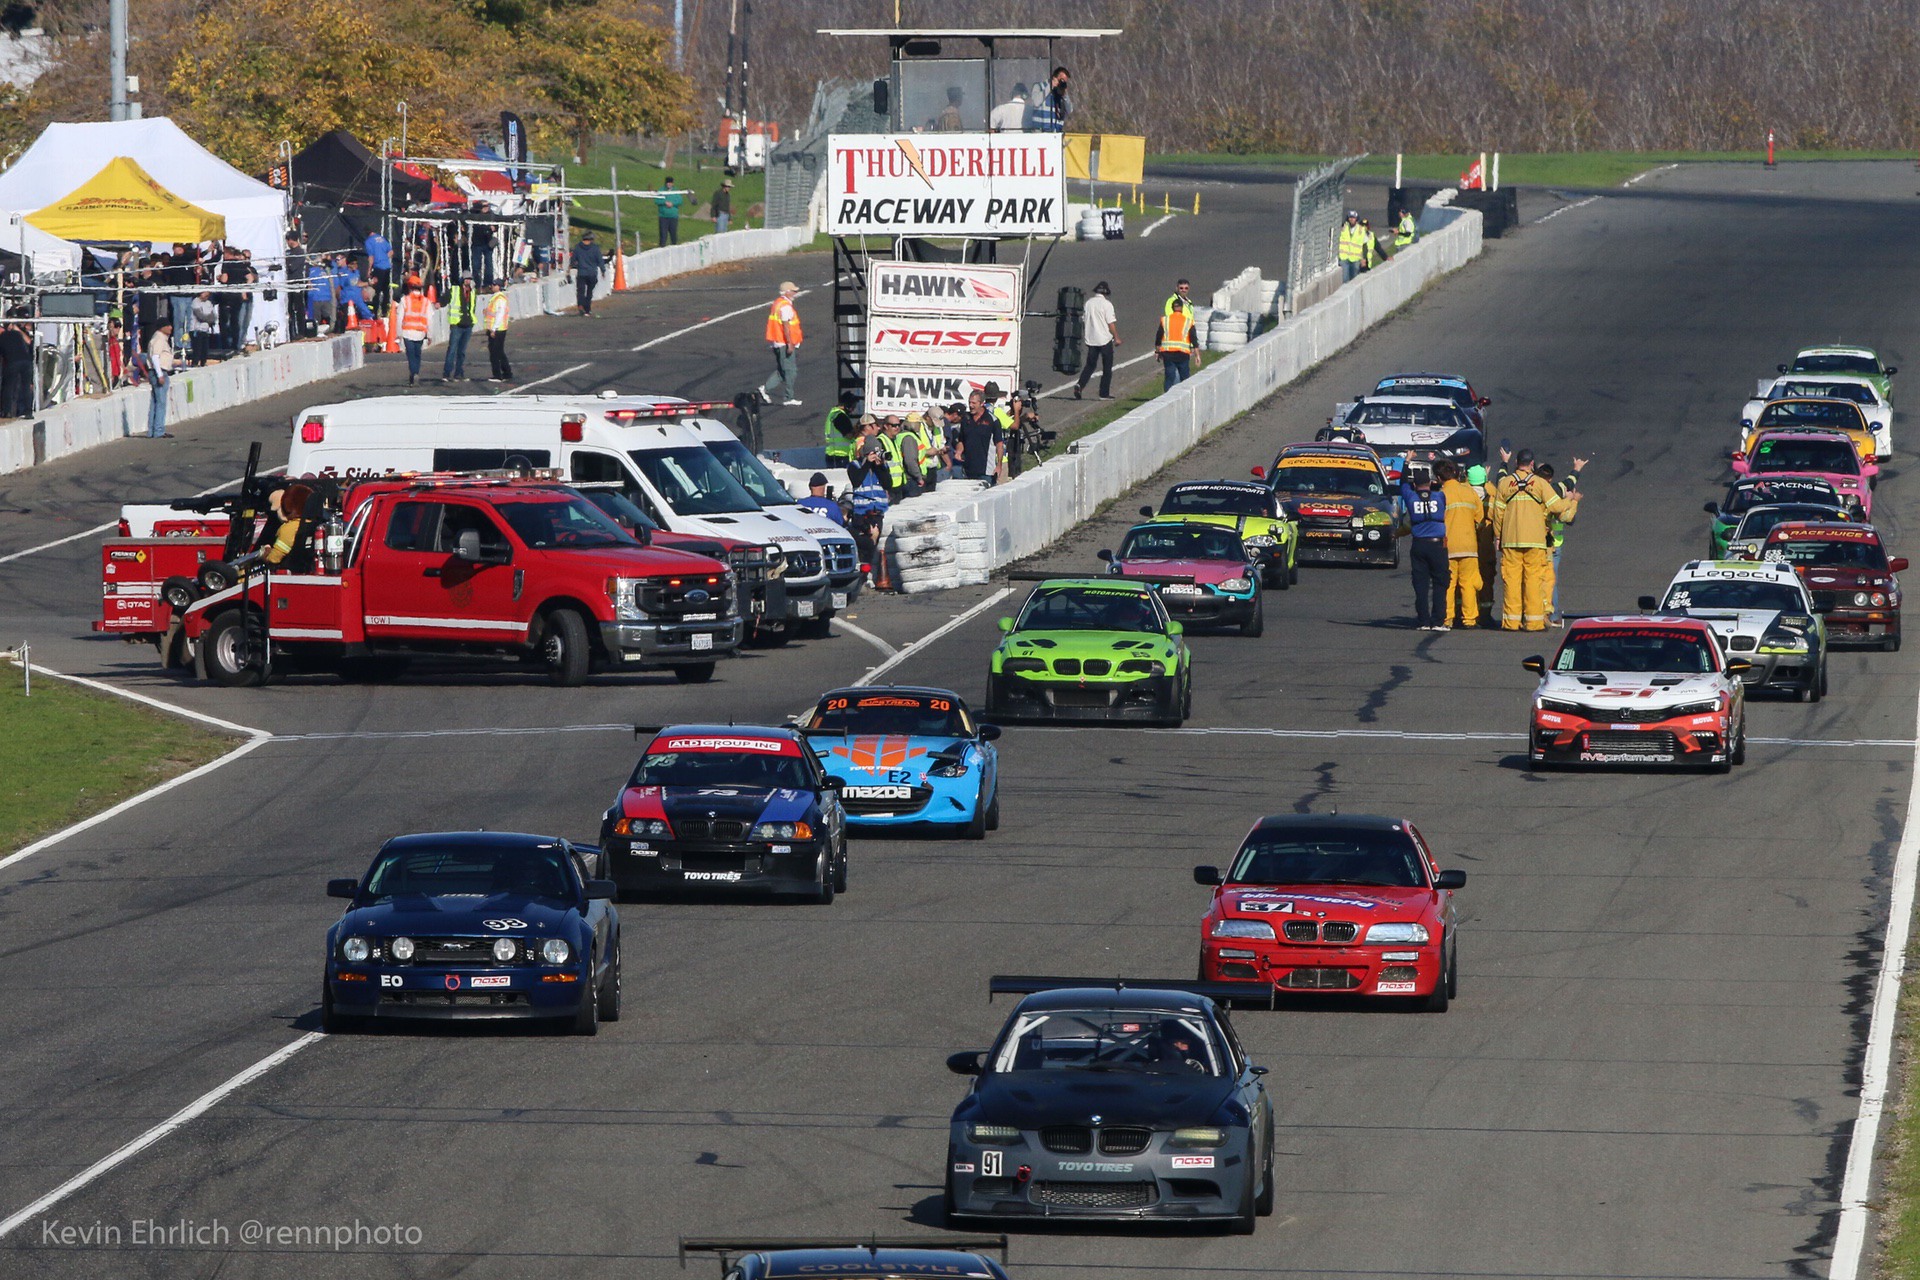 Two lines of cars on track for Thunderhill 2021